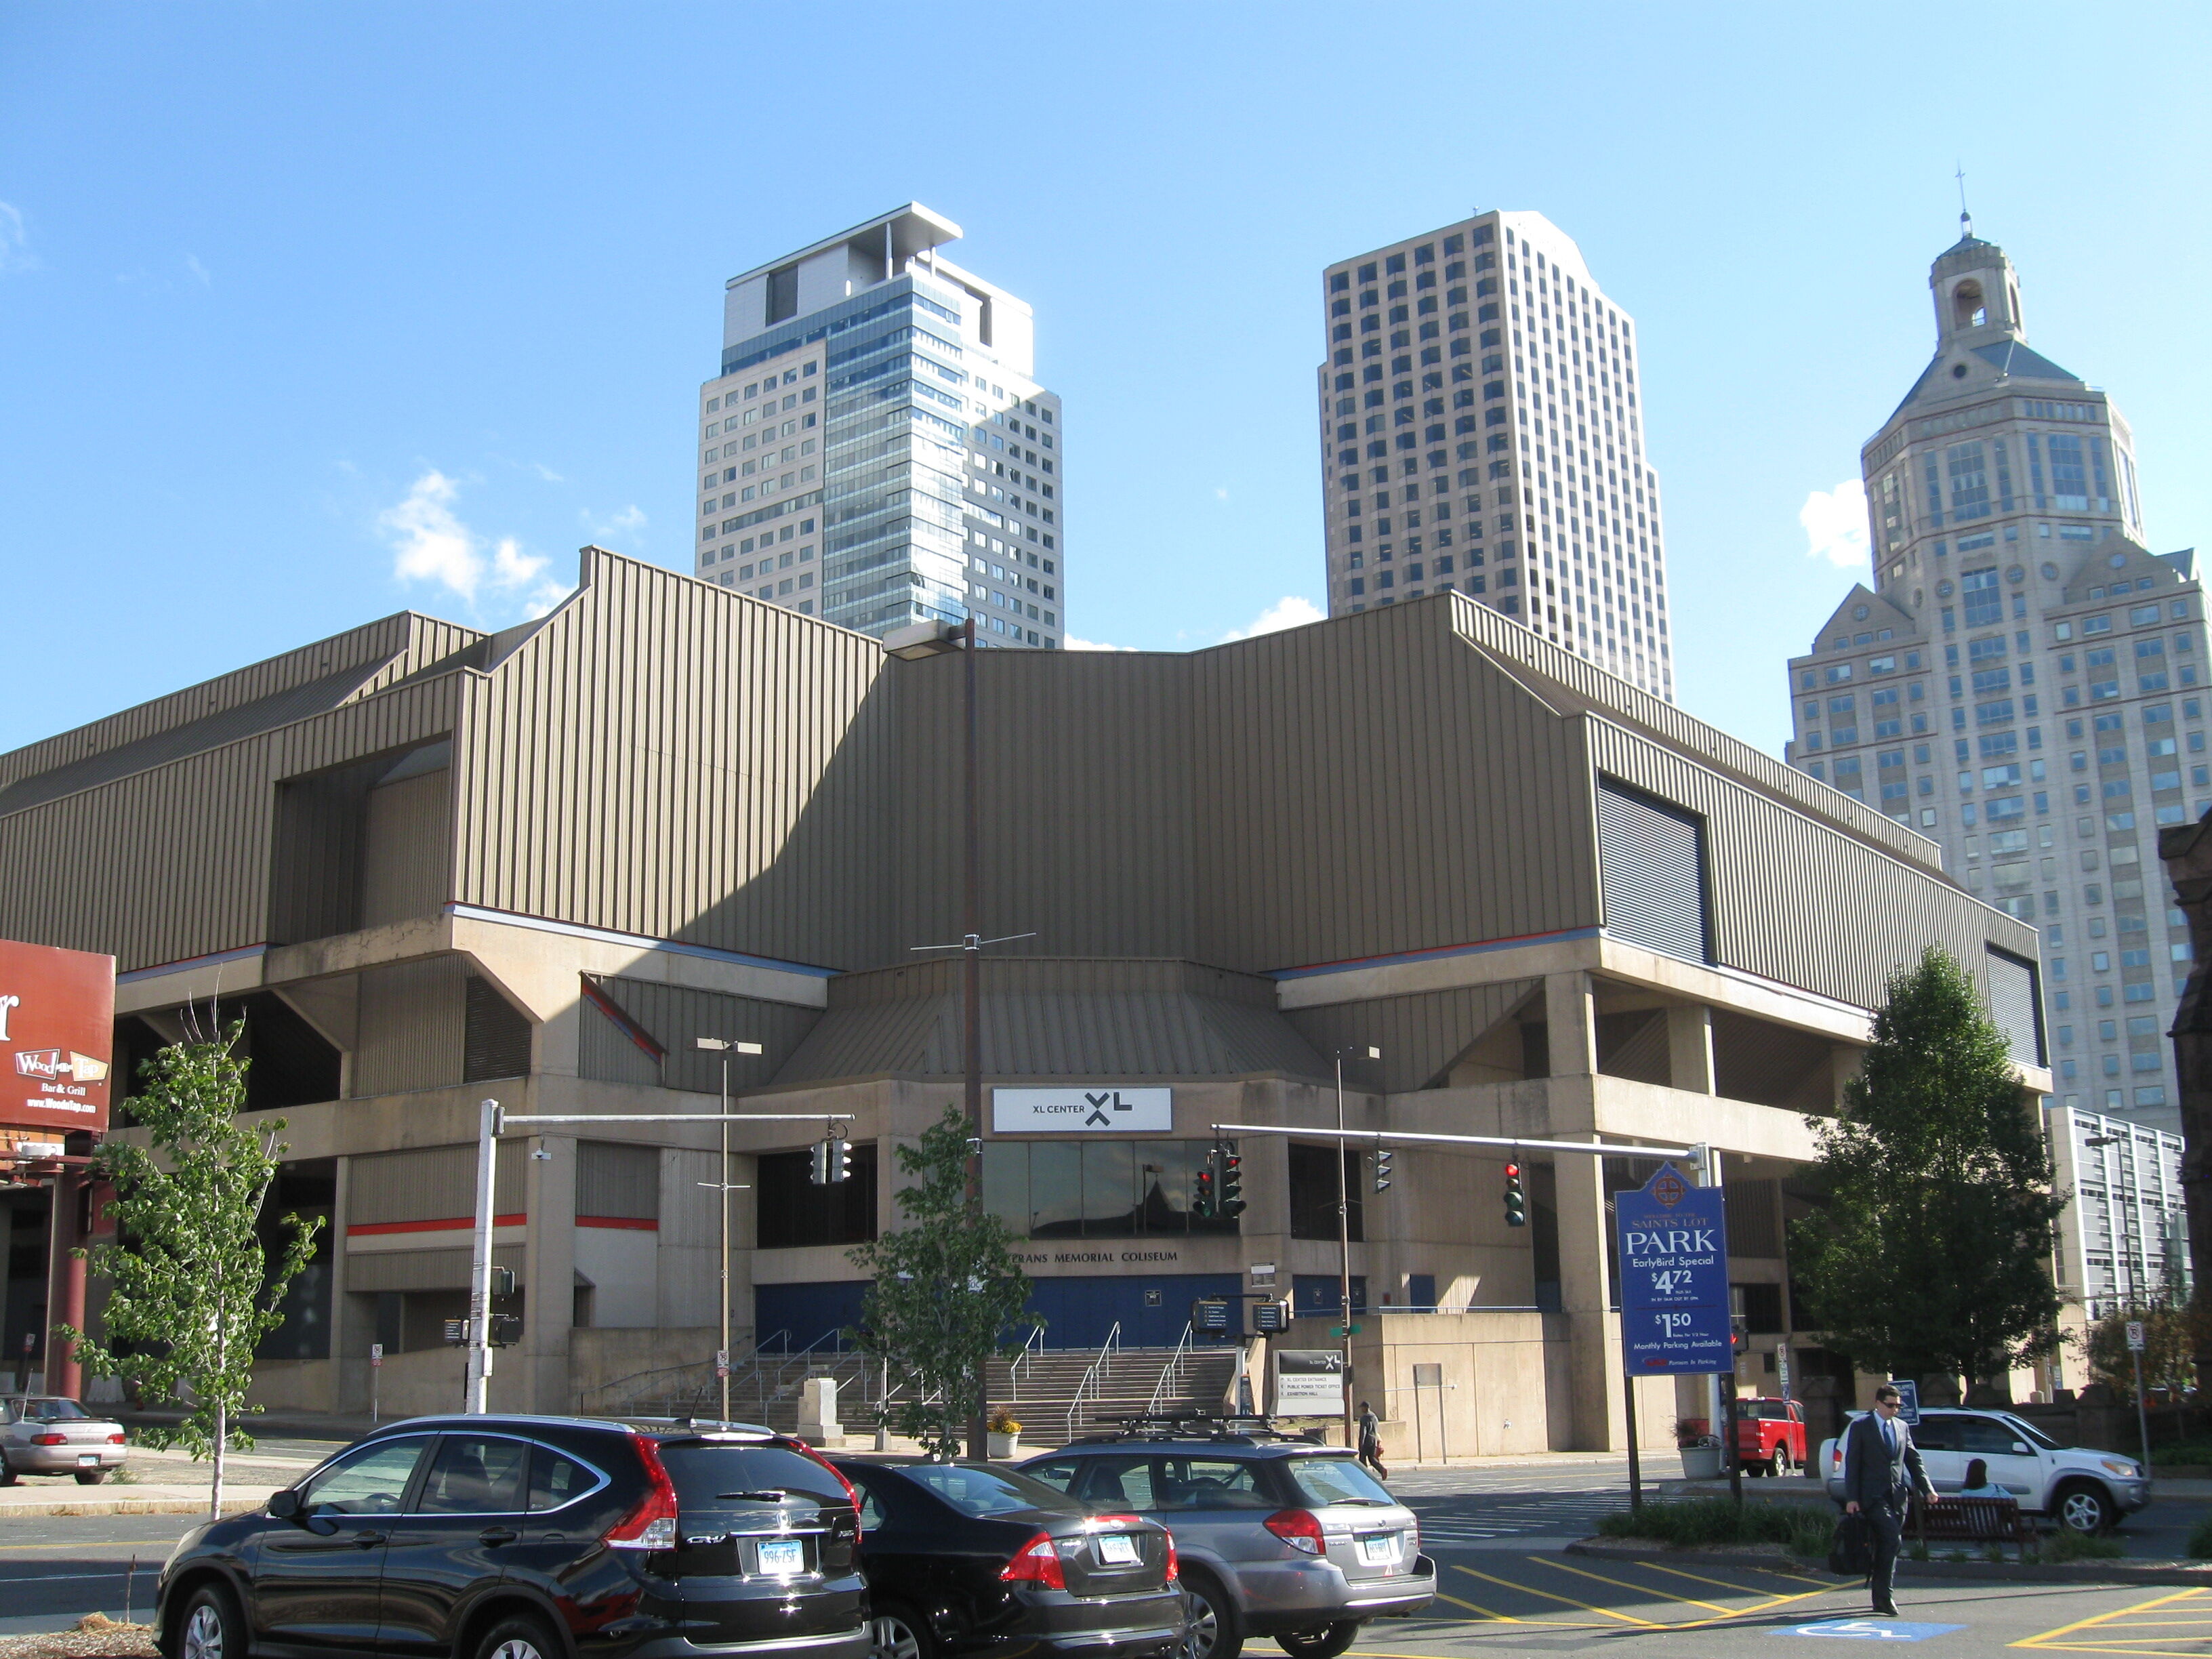 Hartford Civic Center in Hartford, CT. Home of the Hartford Whalers.